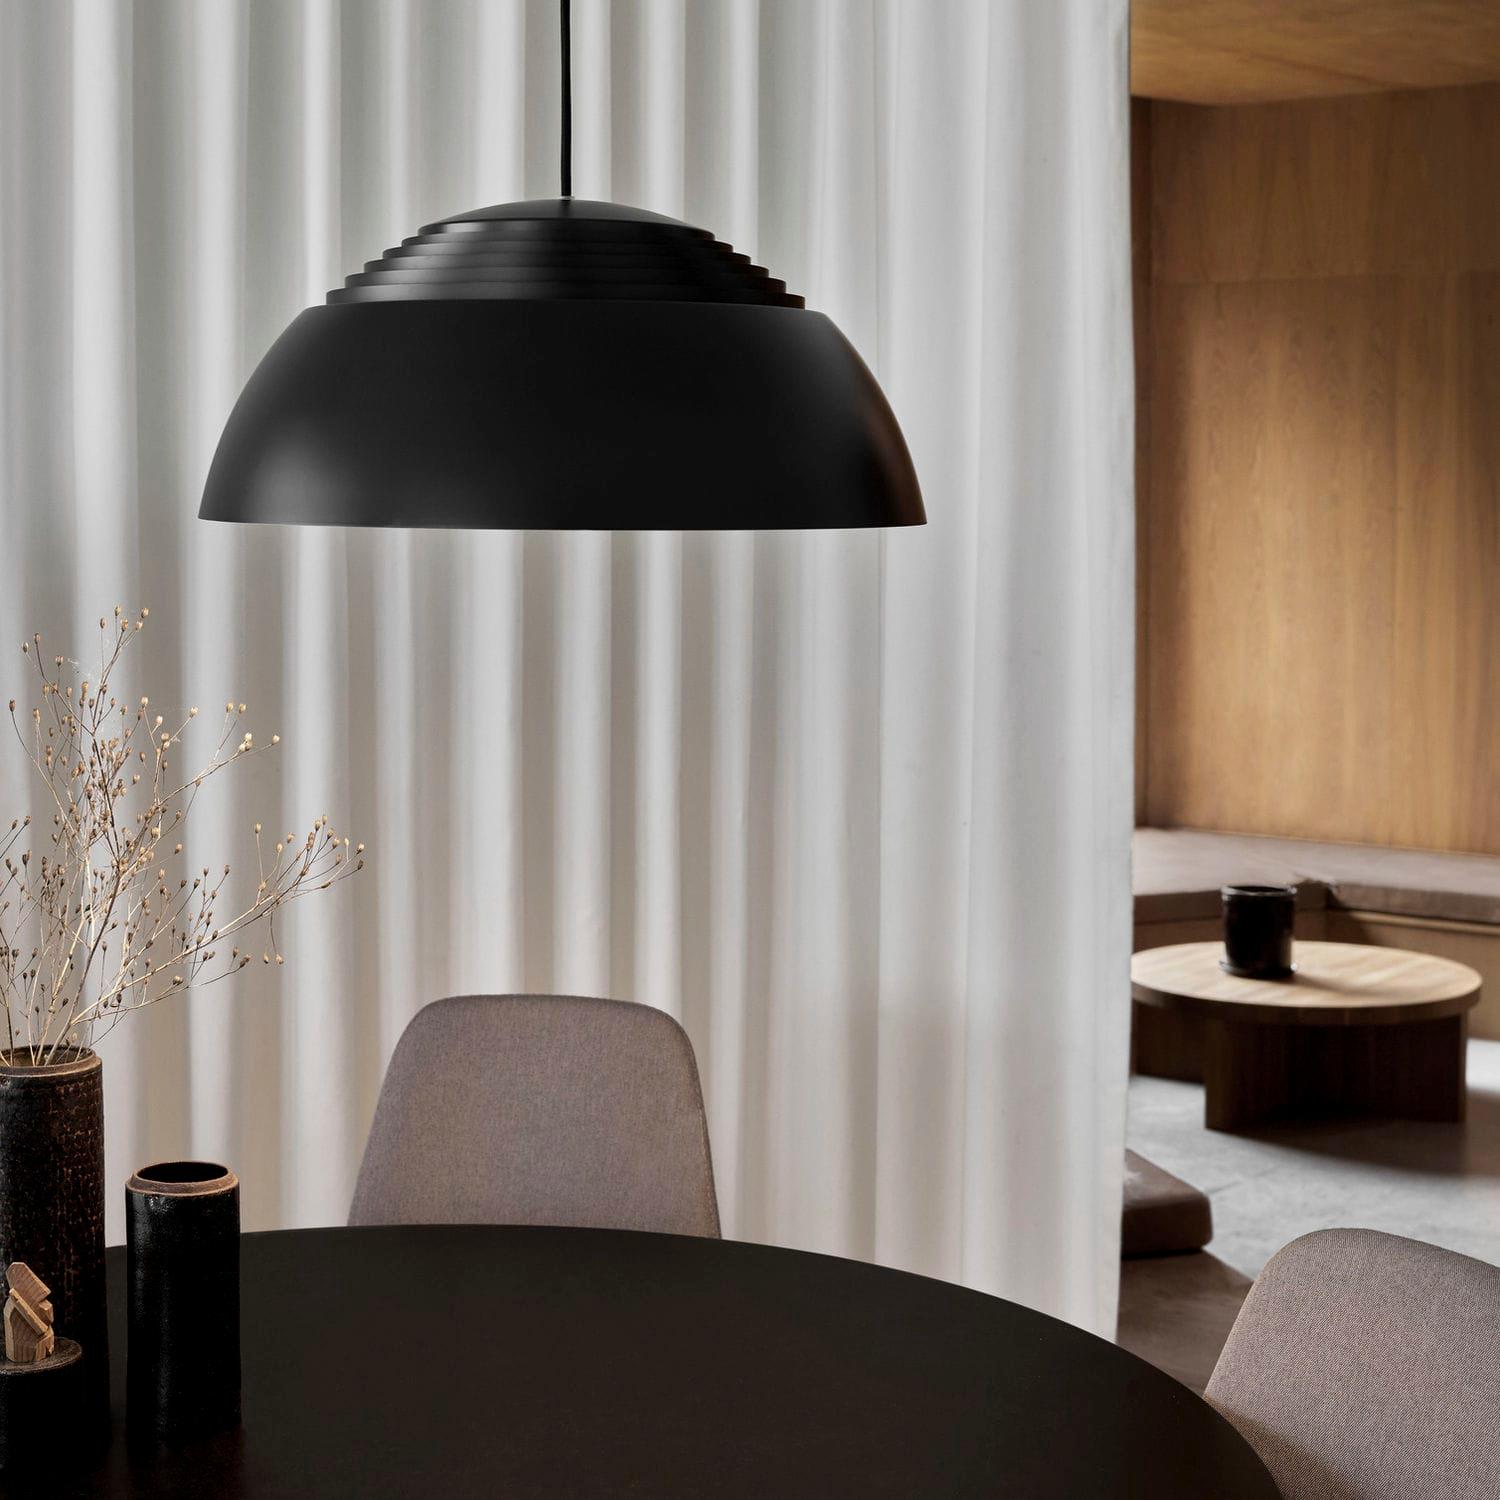 AJ Royal Pendant in Black by Arne Jacobsen for Louis Poulsen In New Condition For Sale In Glendale, CA